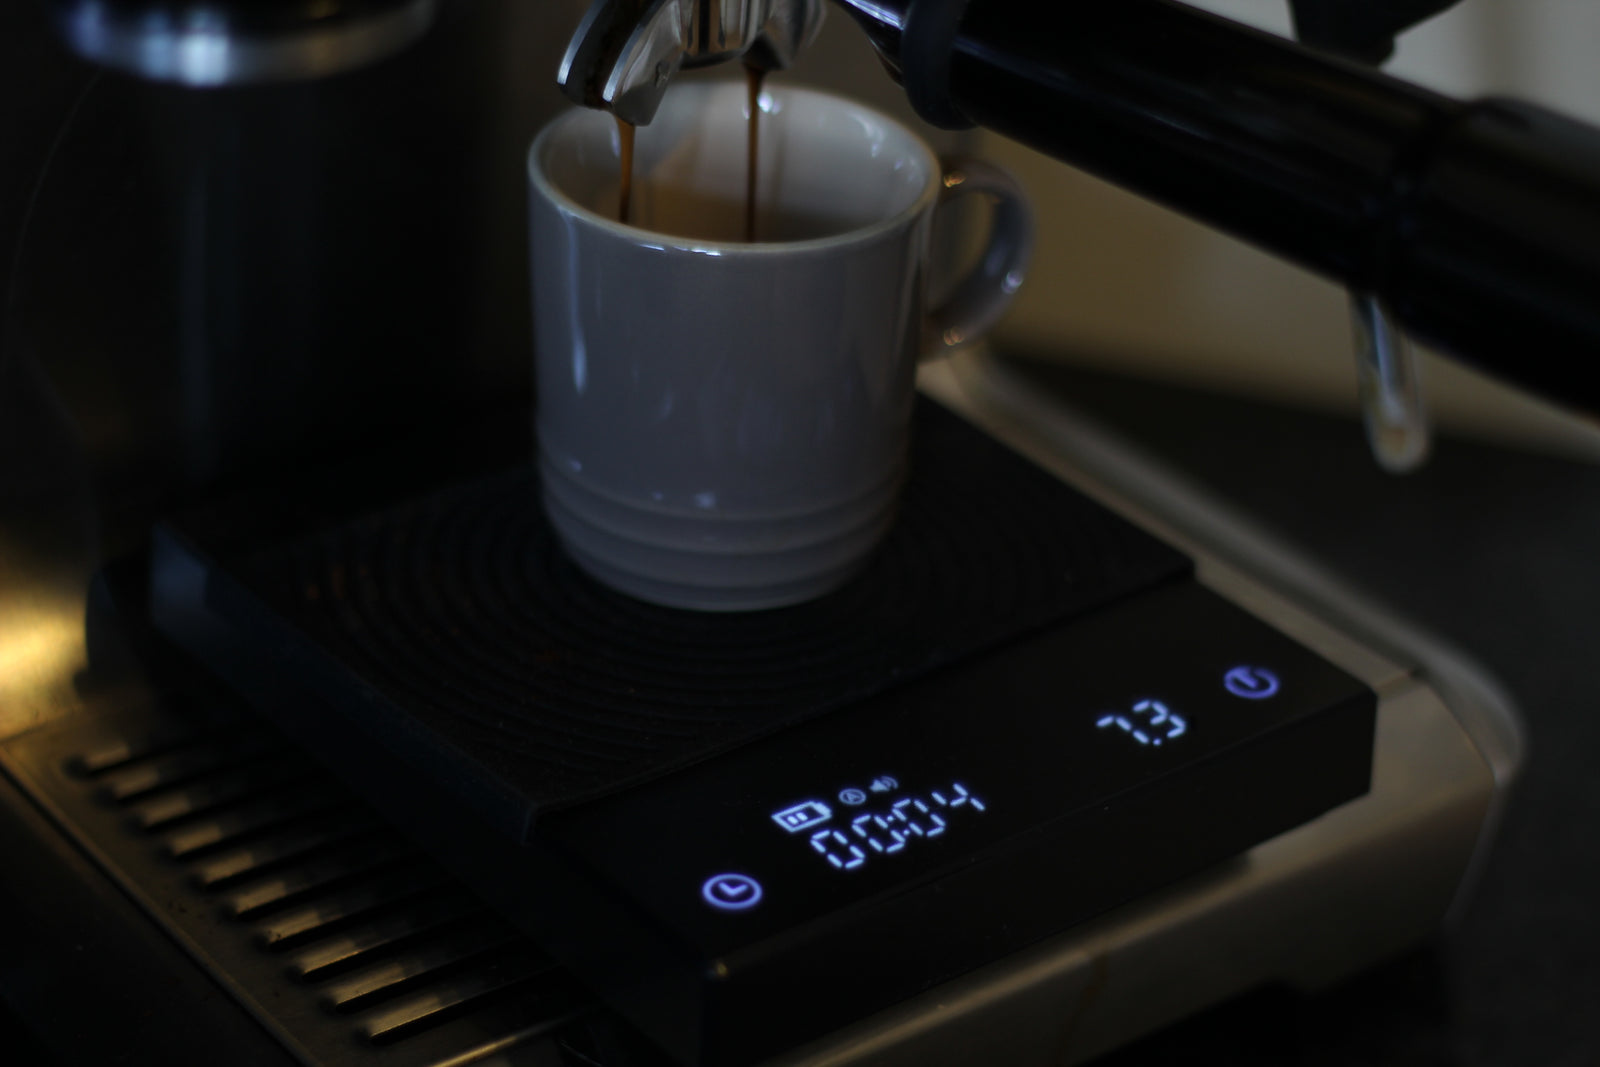 Timemore Black Mirror Review - Is It The Coffee Scale You Need?